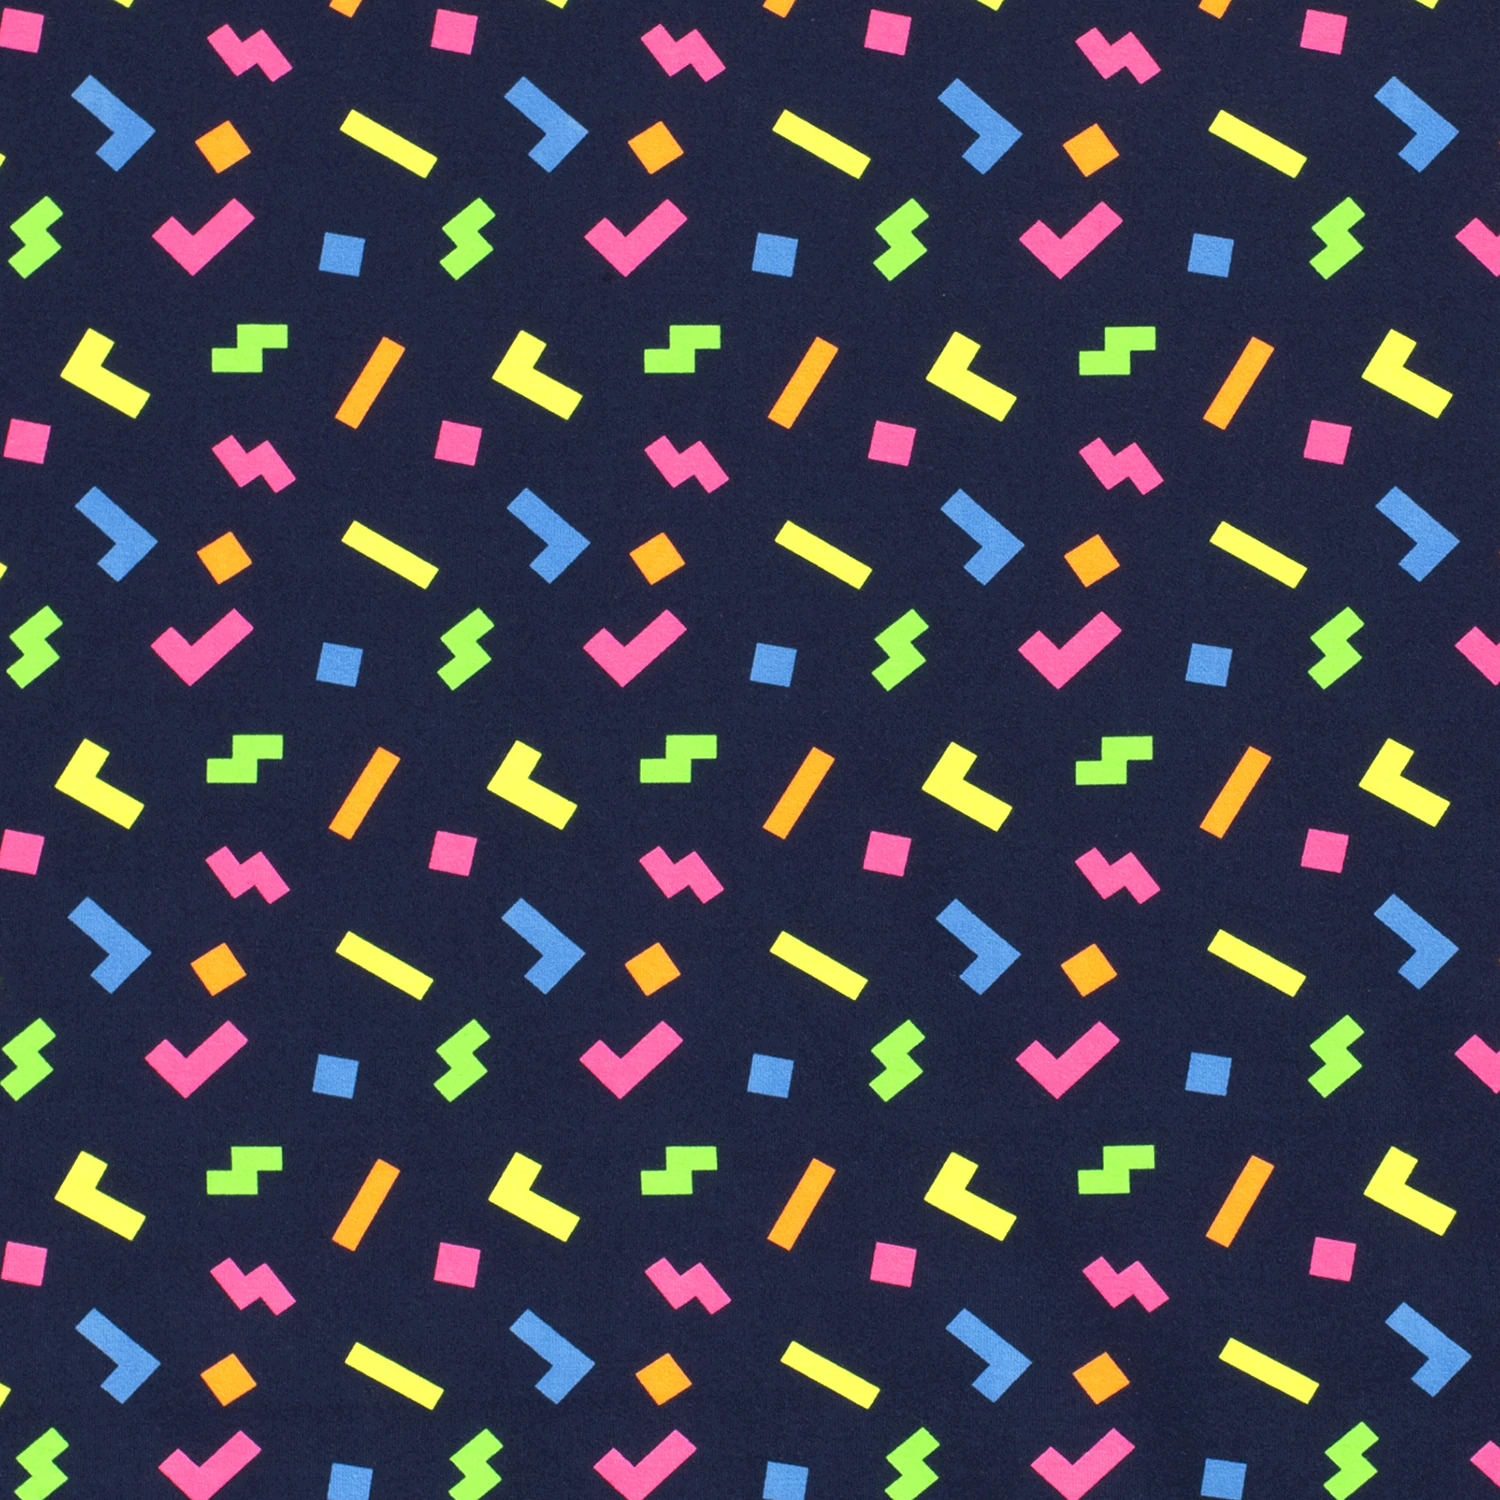 Cotton Jersey Fabric with Neon Shapes on Navy Blue